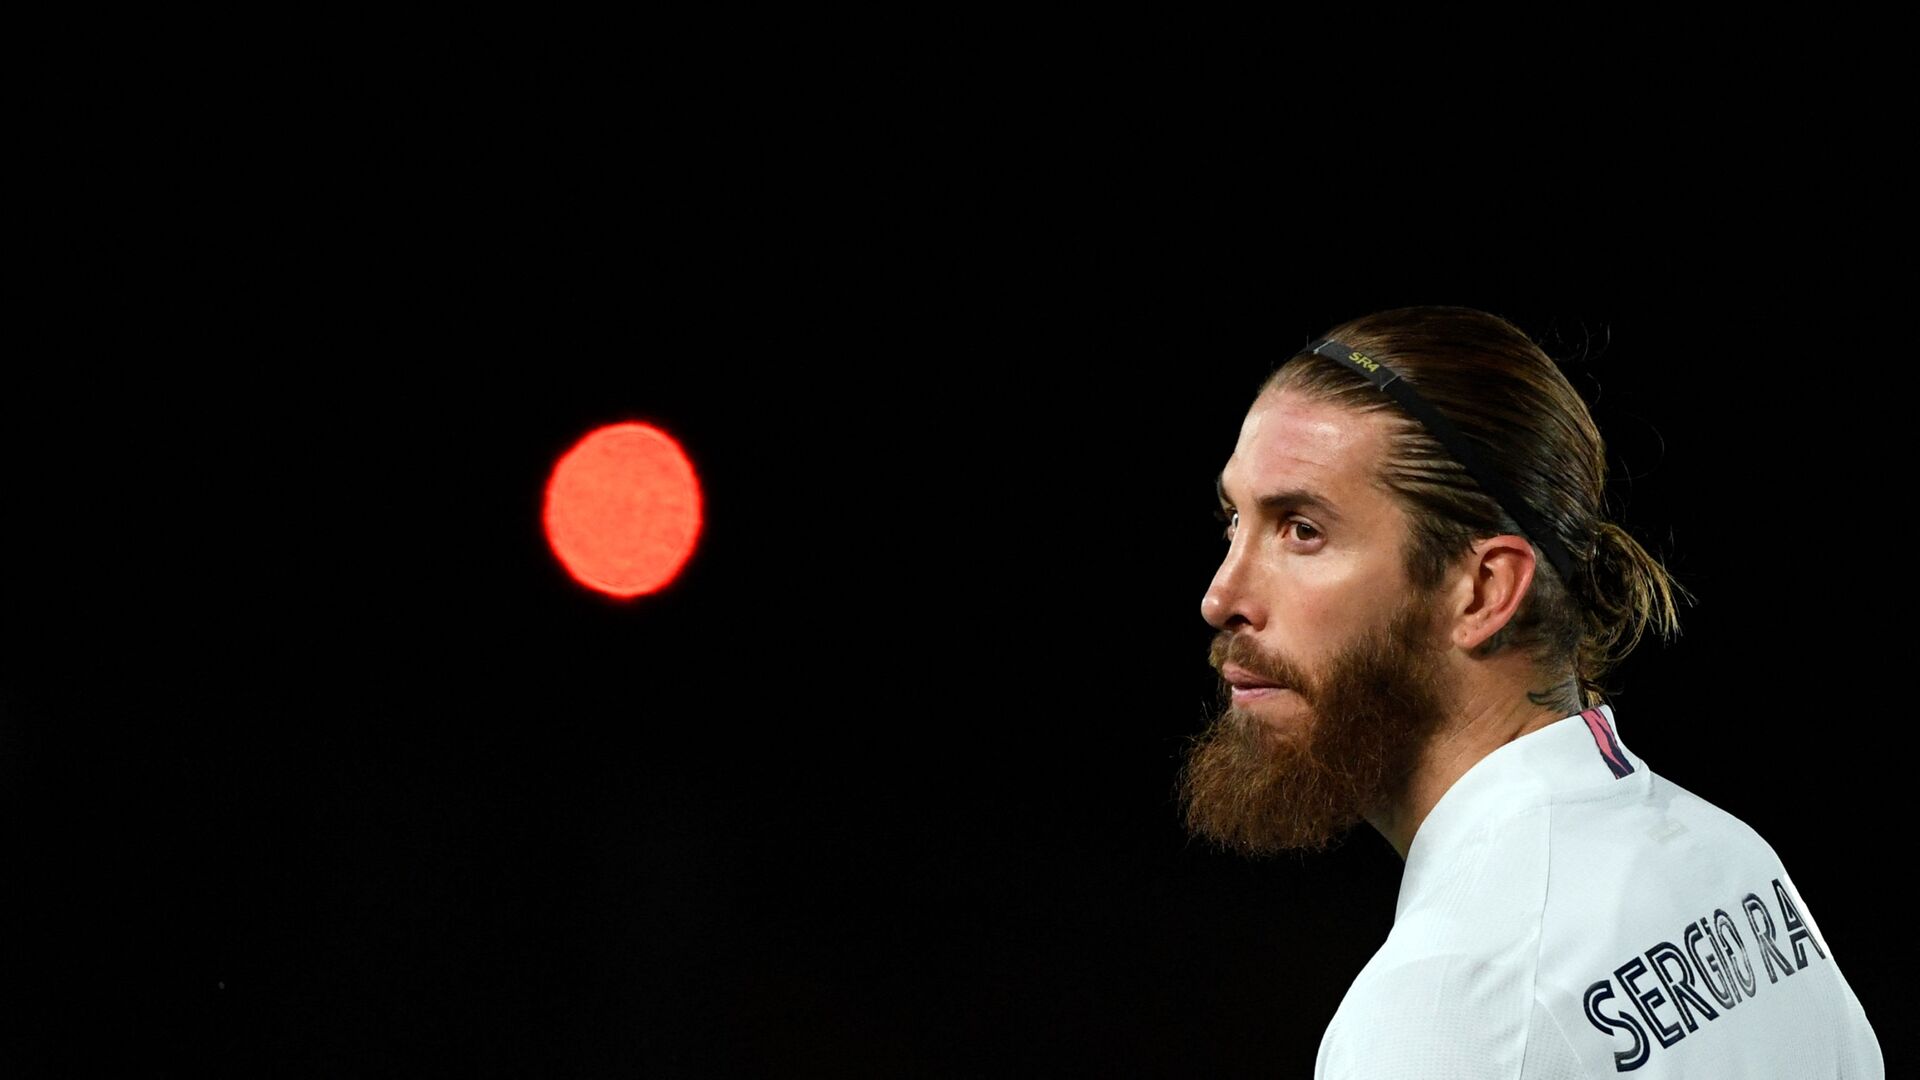 Sergio Ramos    Real Madrid's Spanish defender Sergio Ramos looks on during the UEFA Champions League round of 16 second leg football match between Real Madrid CF and Atalanta at the Alfredo di Stefano stadium in Valdebebas, on the outskirts of Madrid on March 15, 2021 - اسپوتنیک افغانستان  , 1920, 18.11.2021